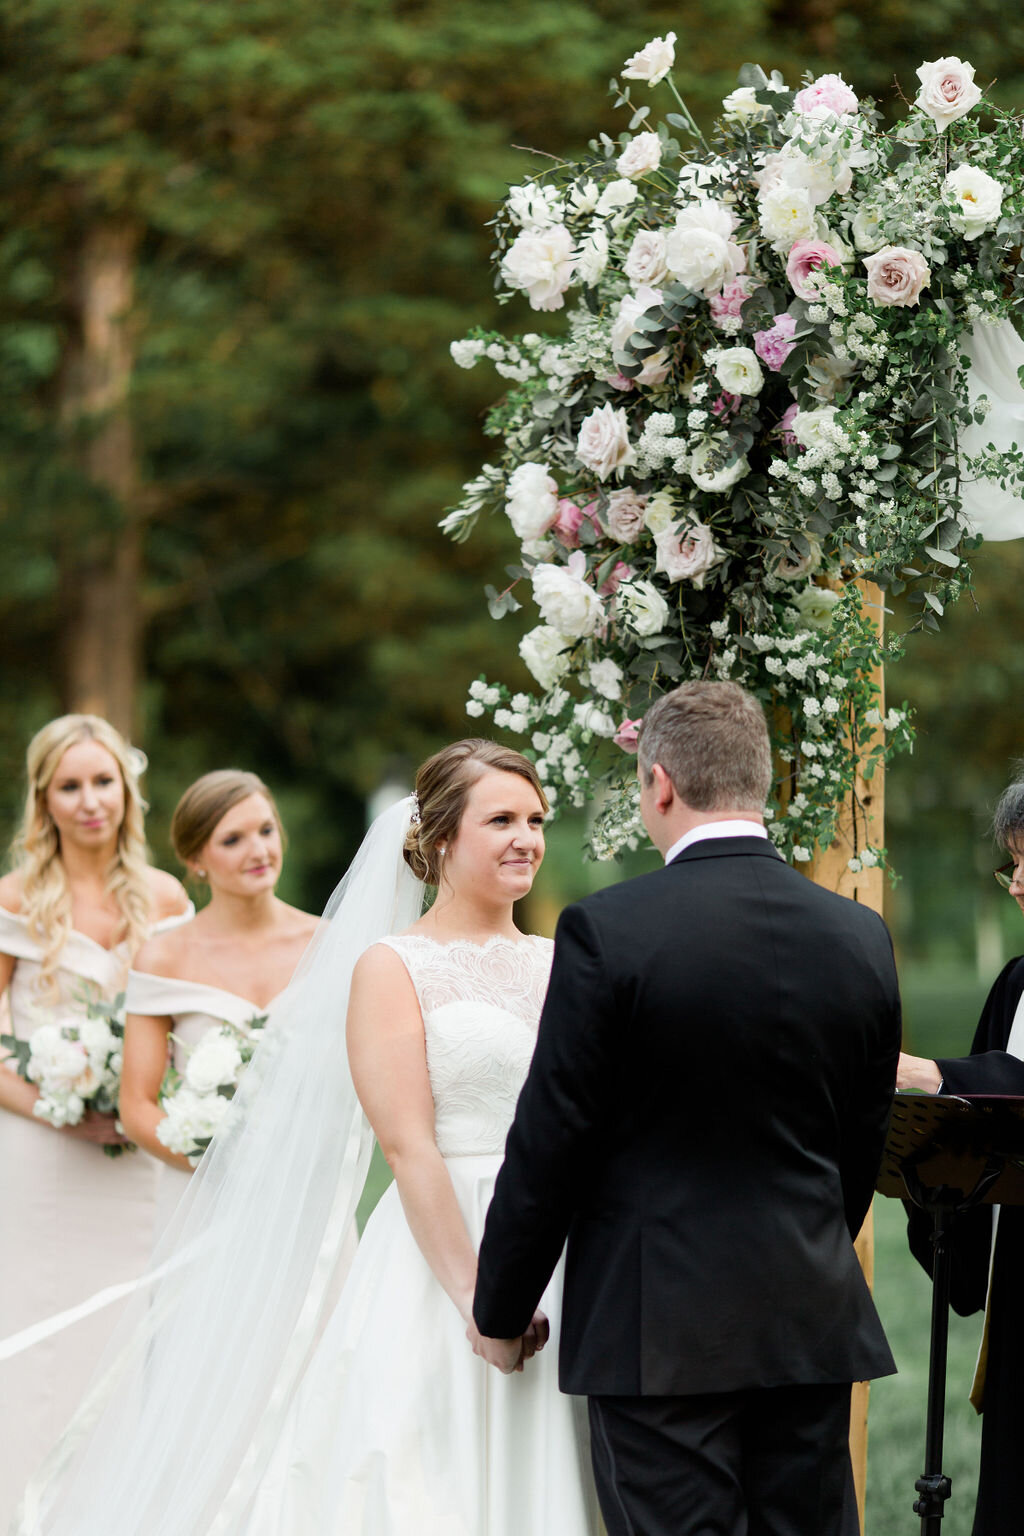 Elegant ceremony with blush pink and white florals - Pearl Weddings &amp; Events